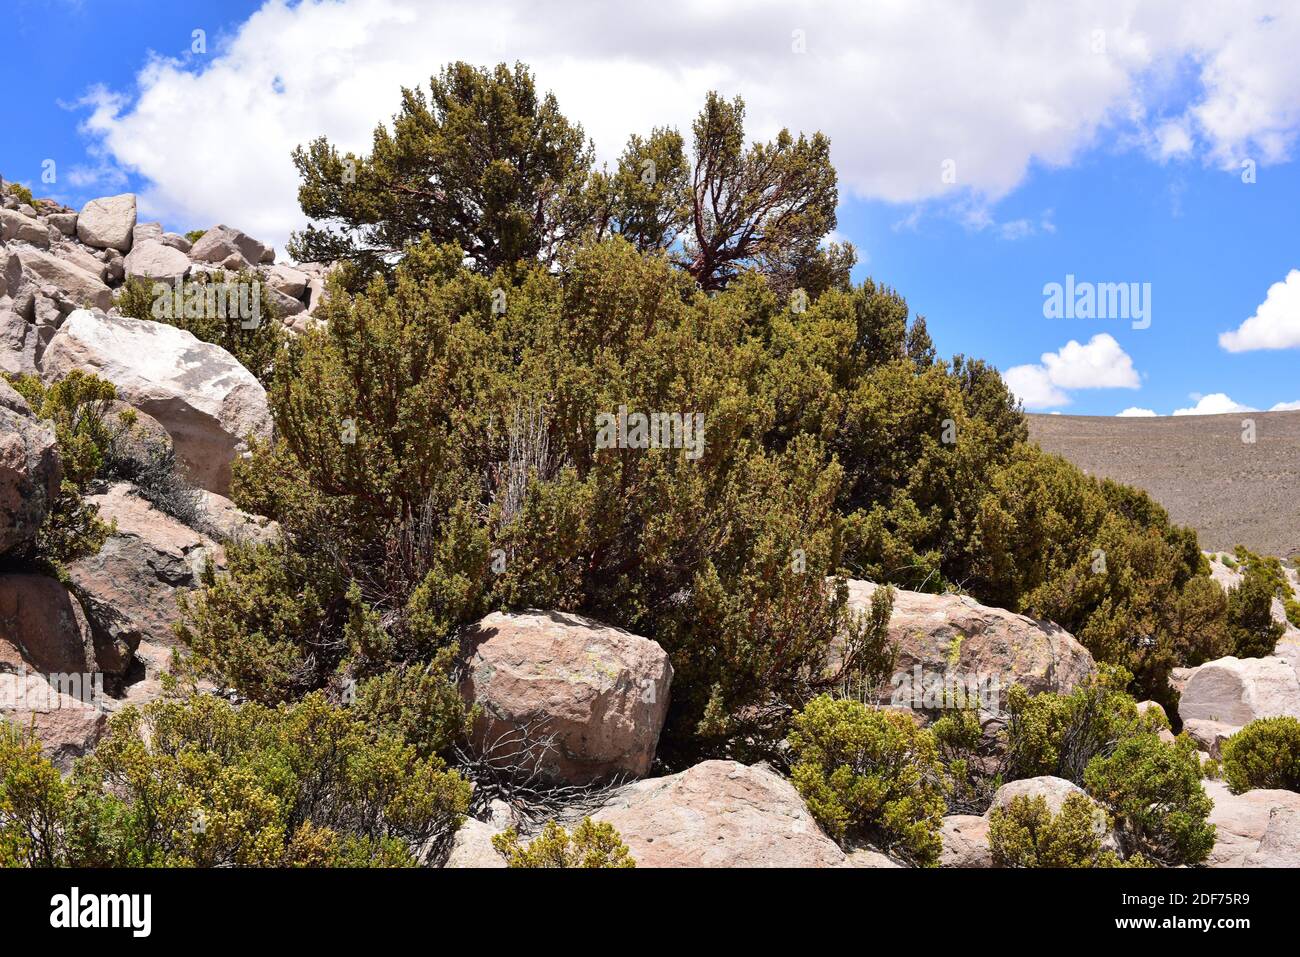 Queñua or queñoa de altura (Polylepis rugulosa) is an endangered small tree native to Andes Mountains. This photo was taken in Lauca National Park, Stock Photo